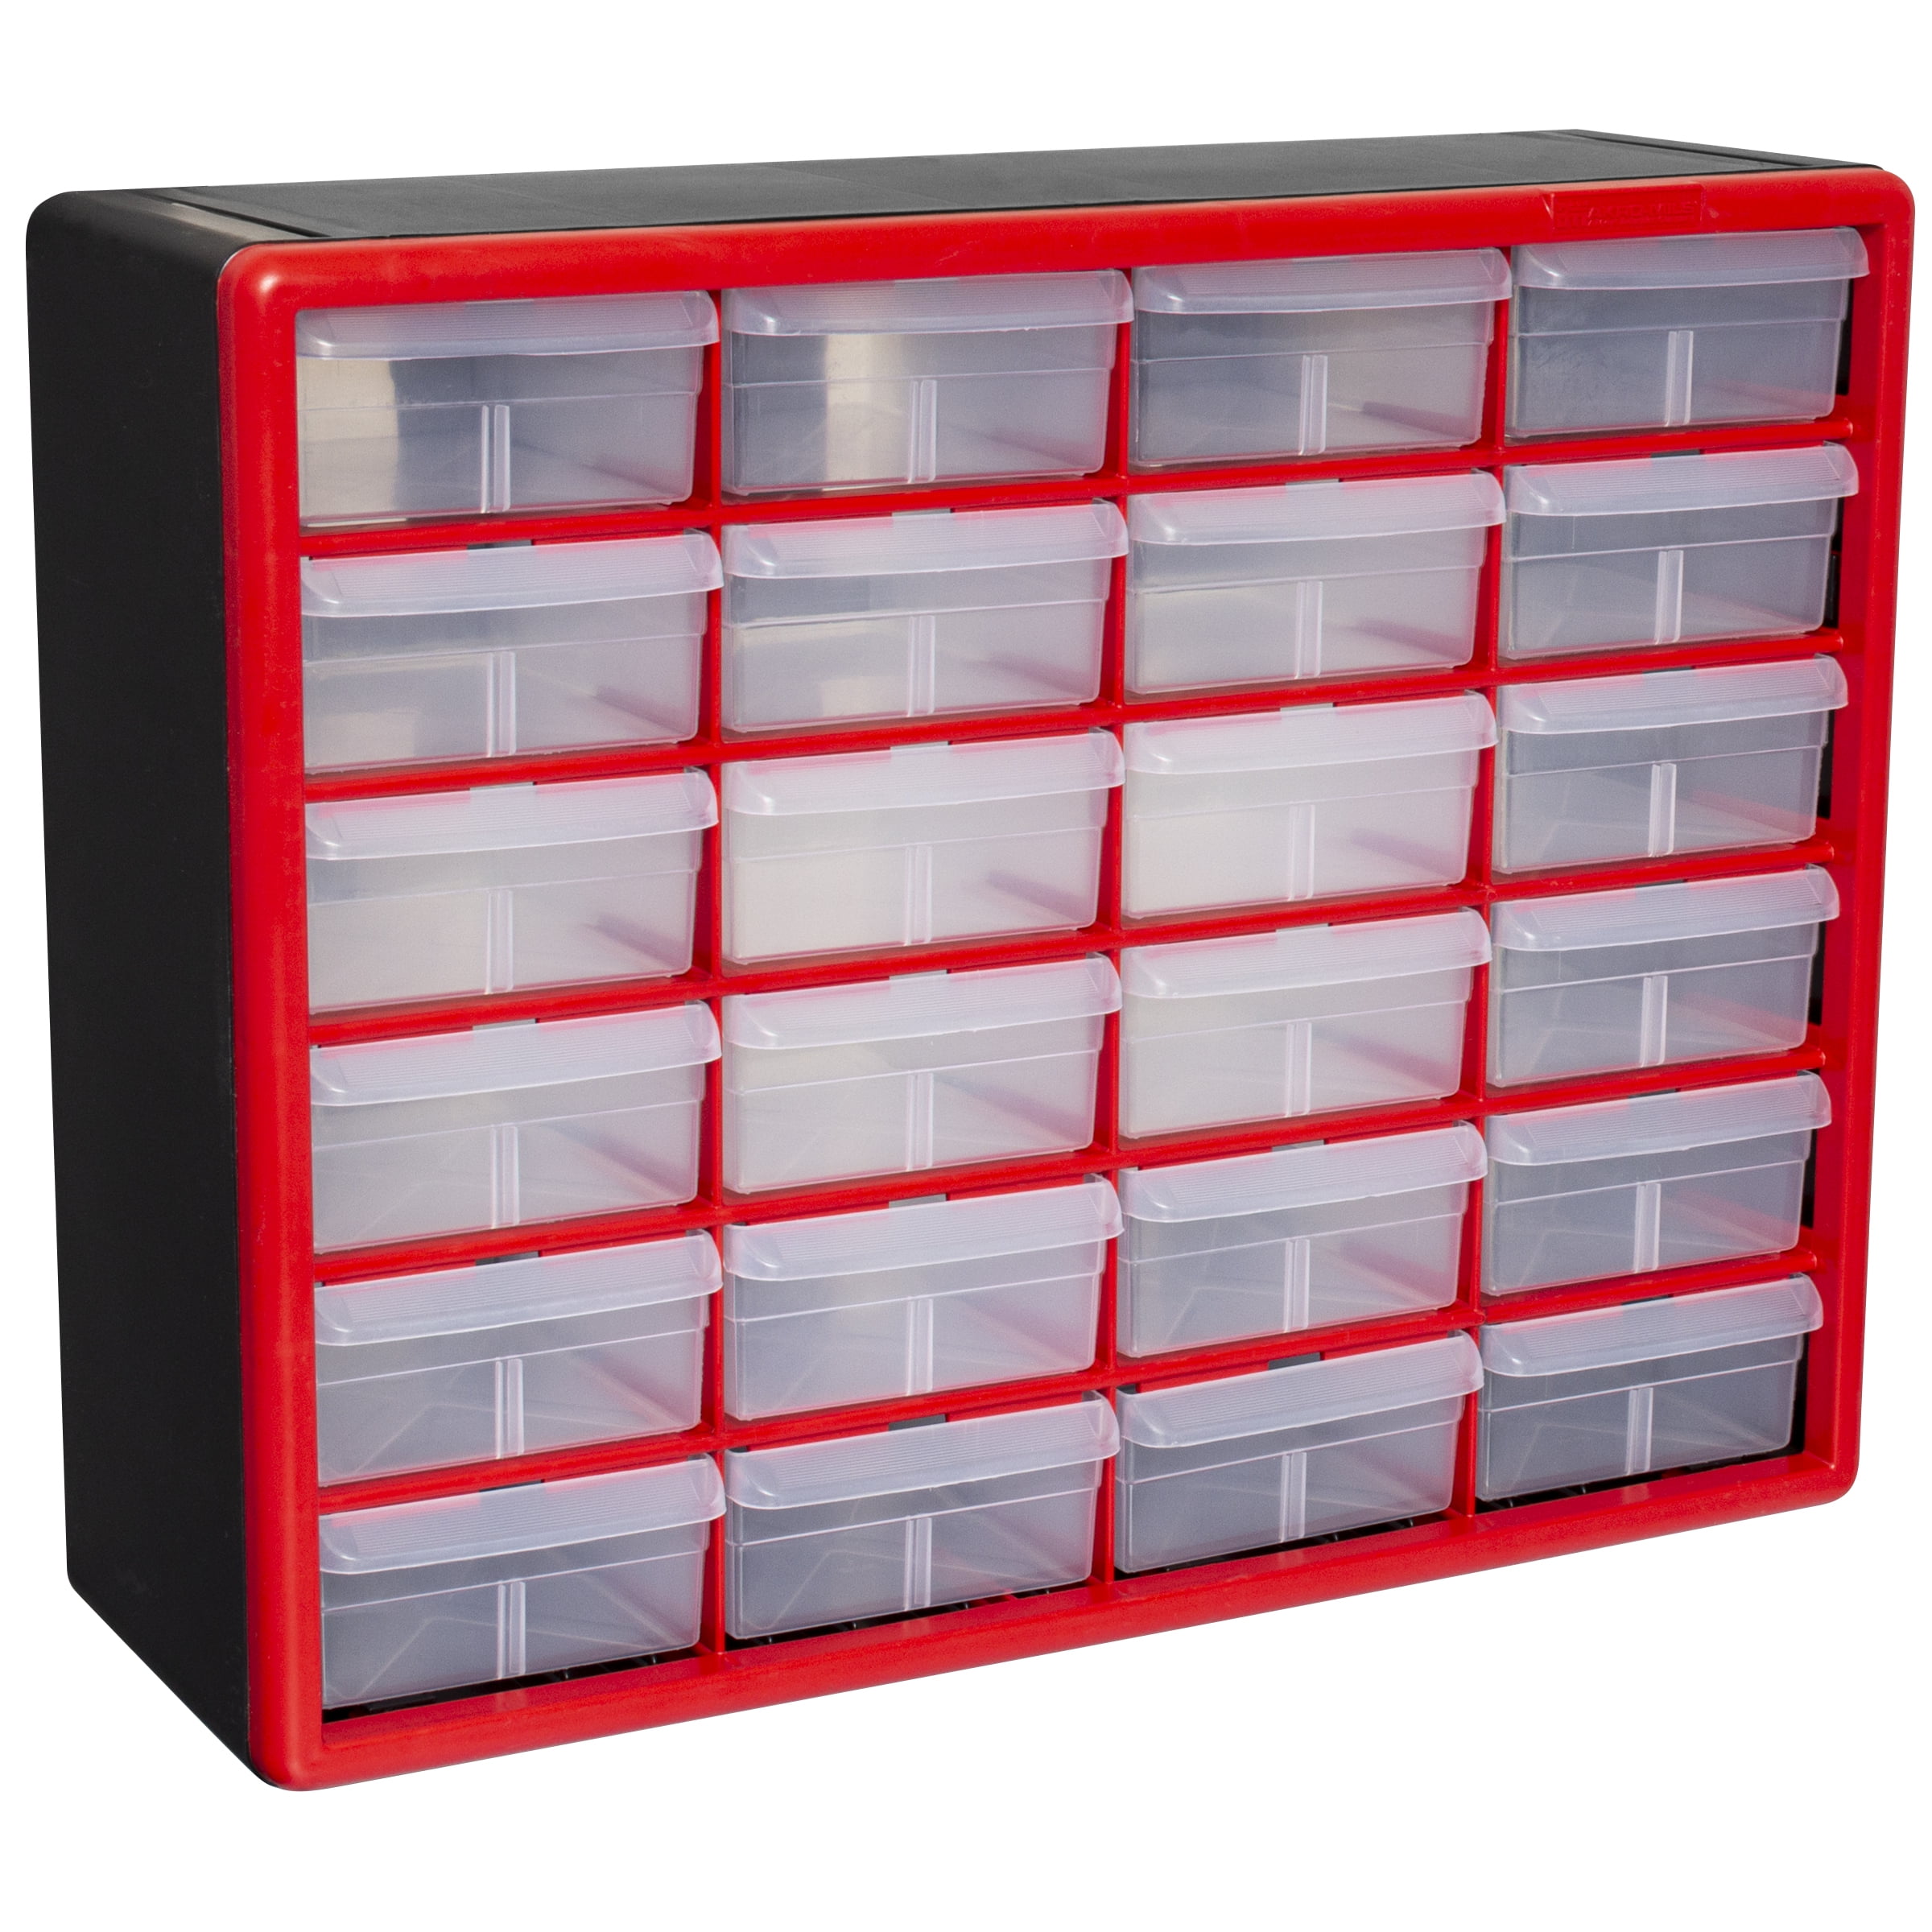 AkroMils 24 Drawer Plastic Storage Organizer with Drawers for